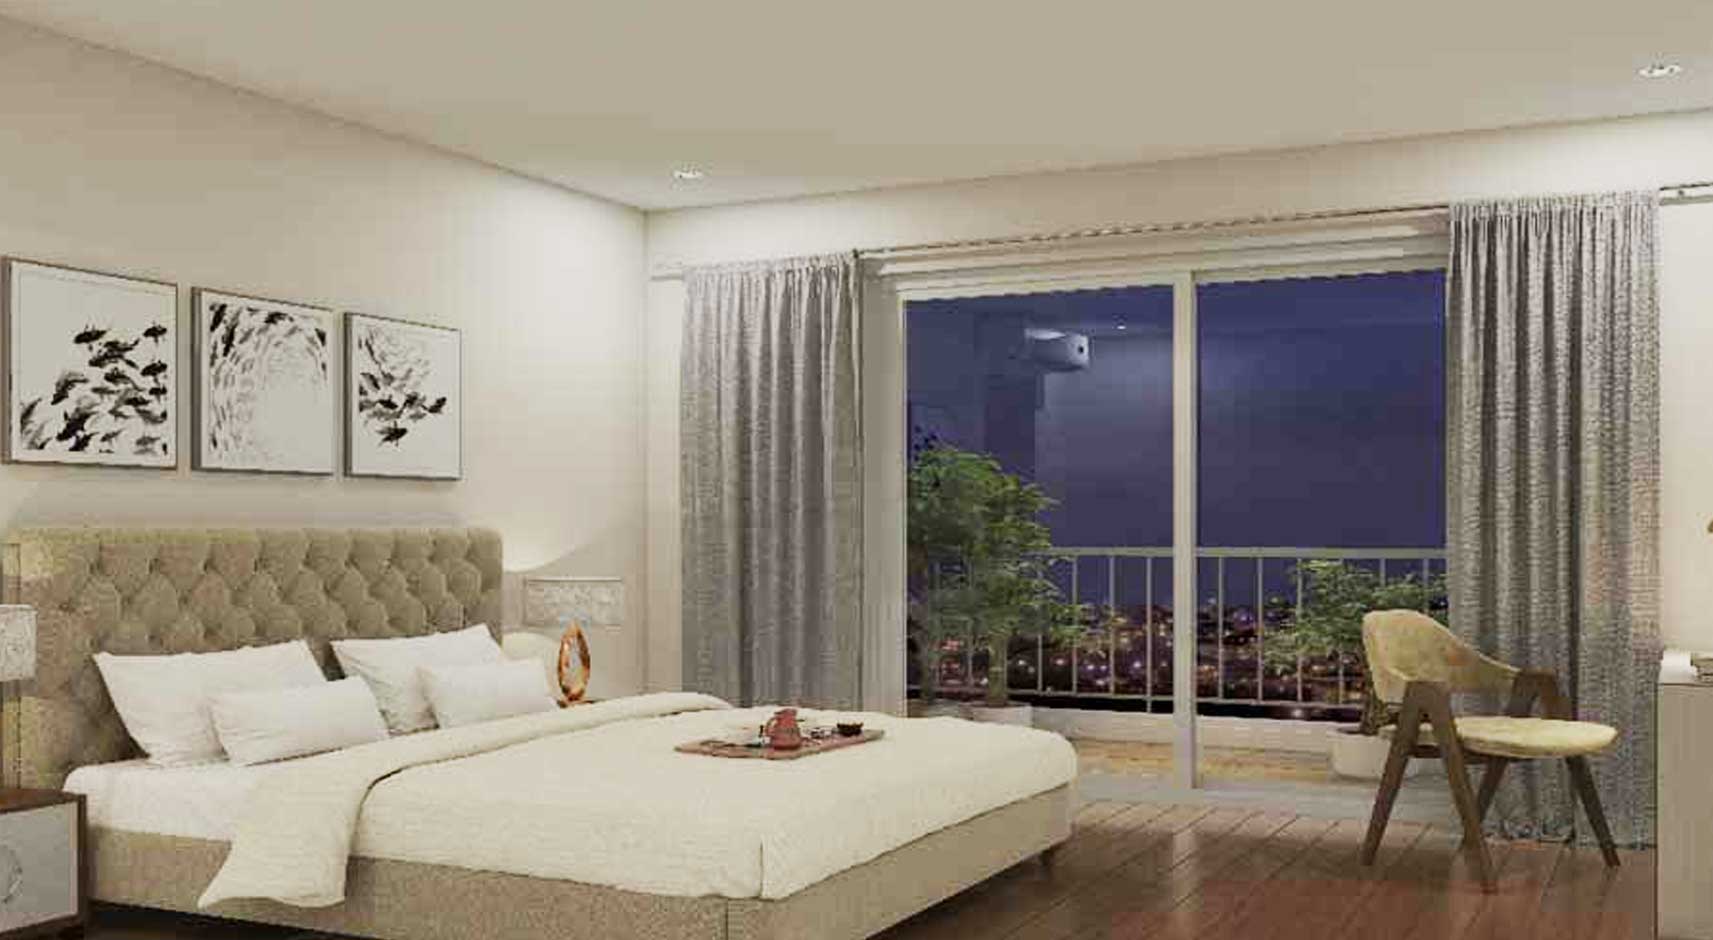 Godrej Tropical Isle is an exclusive residential project